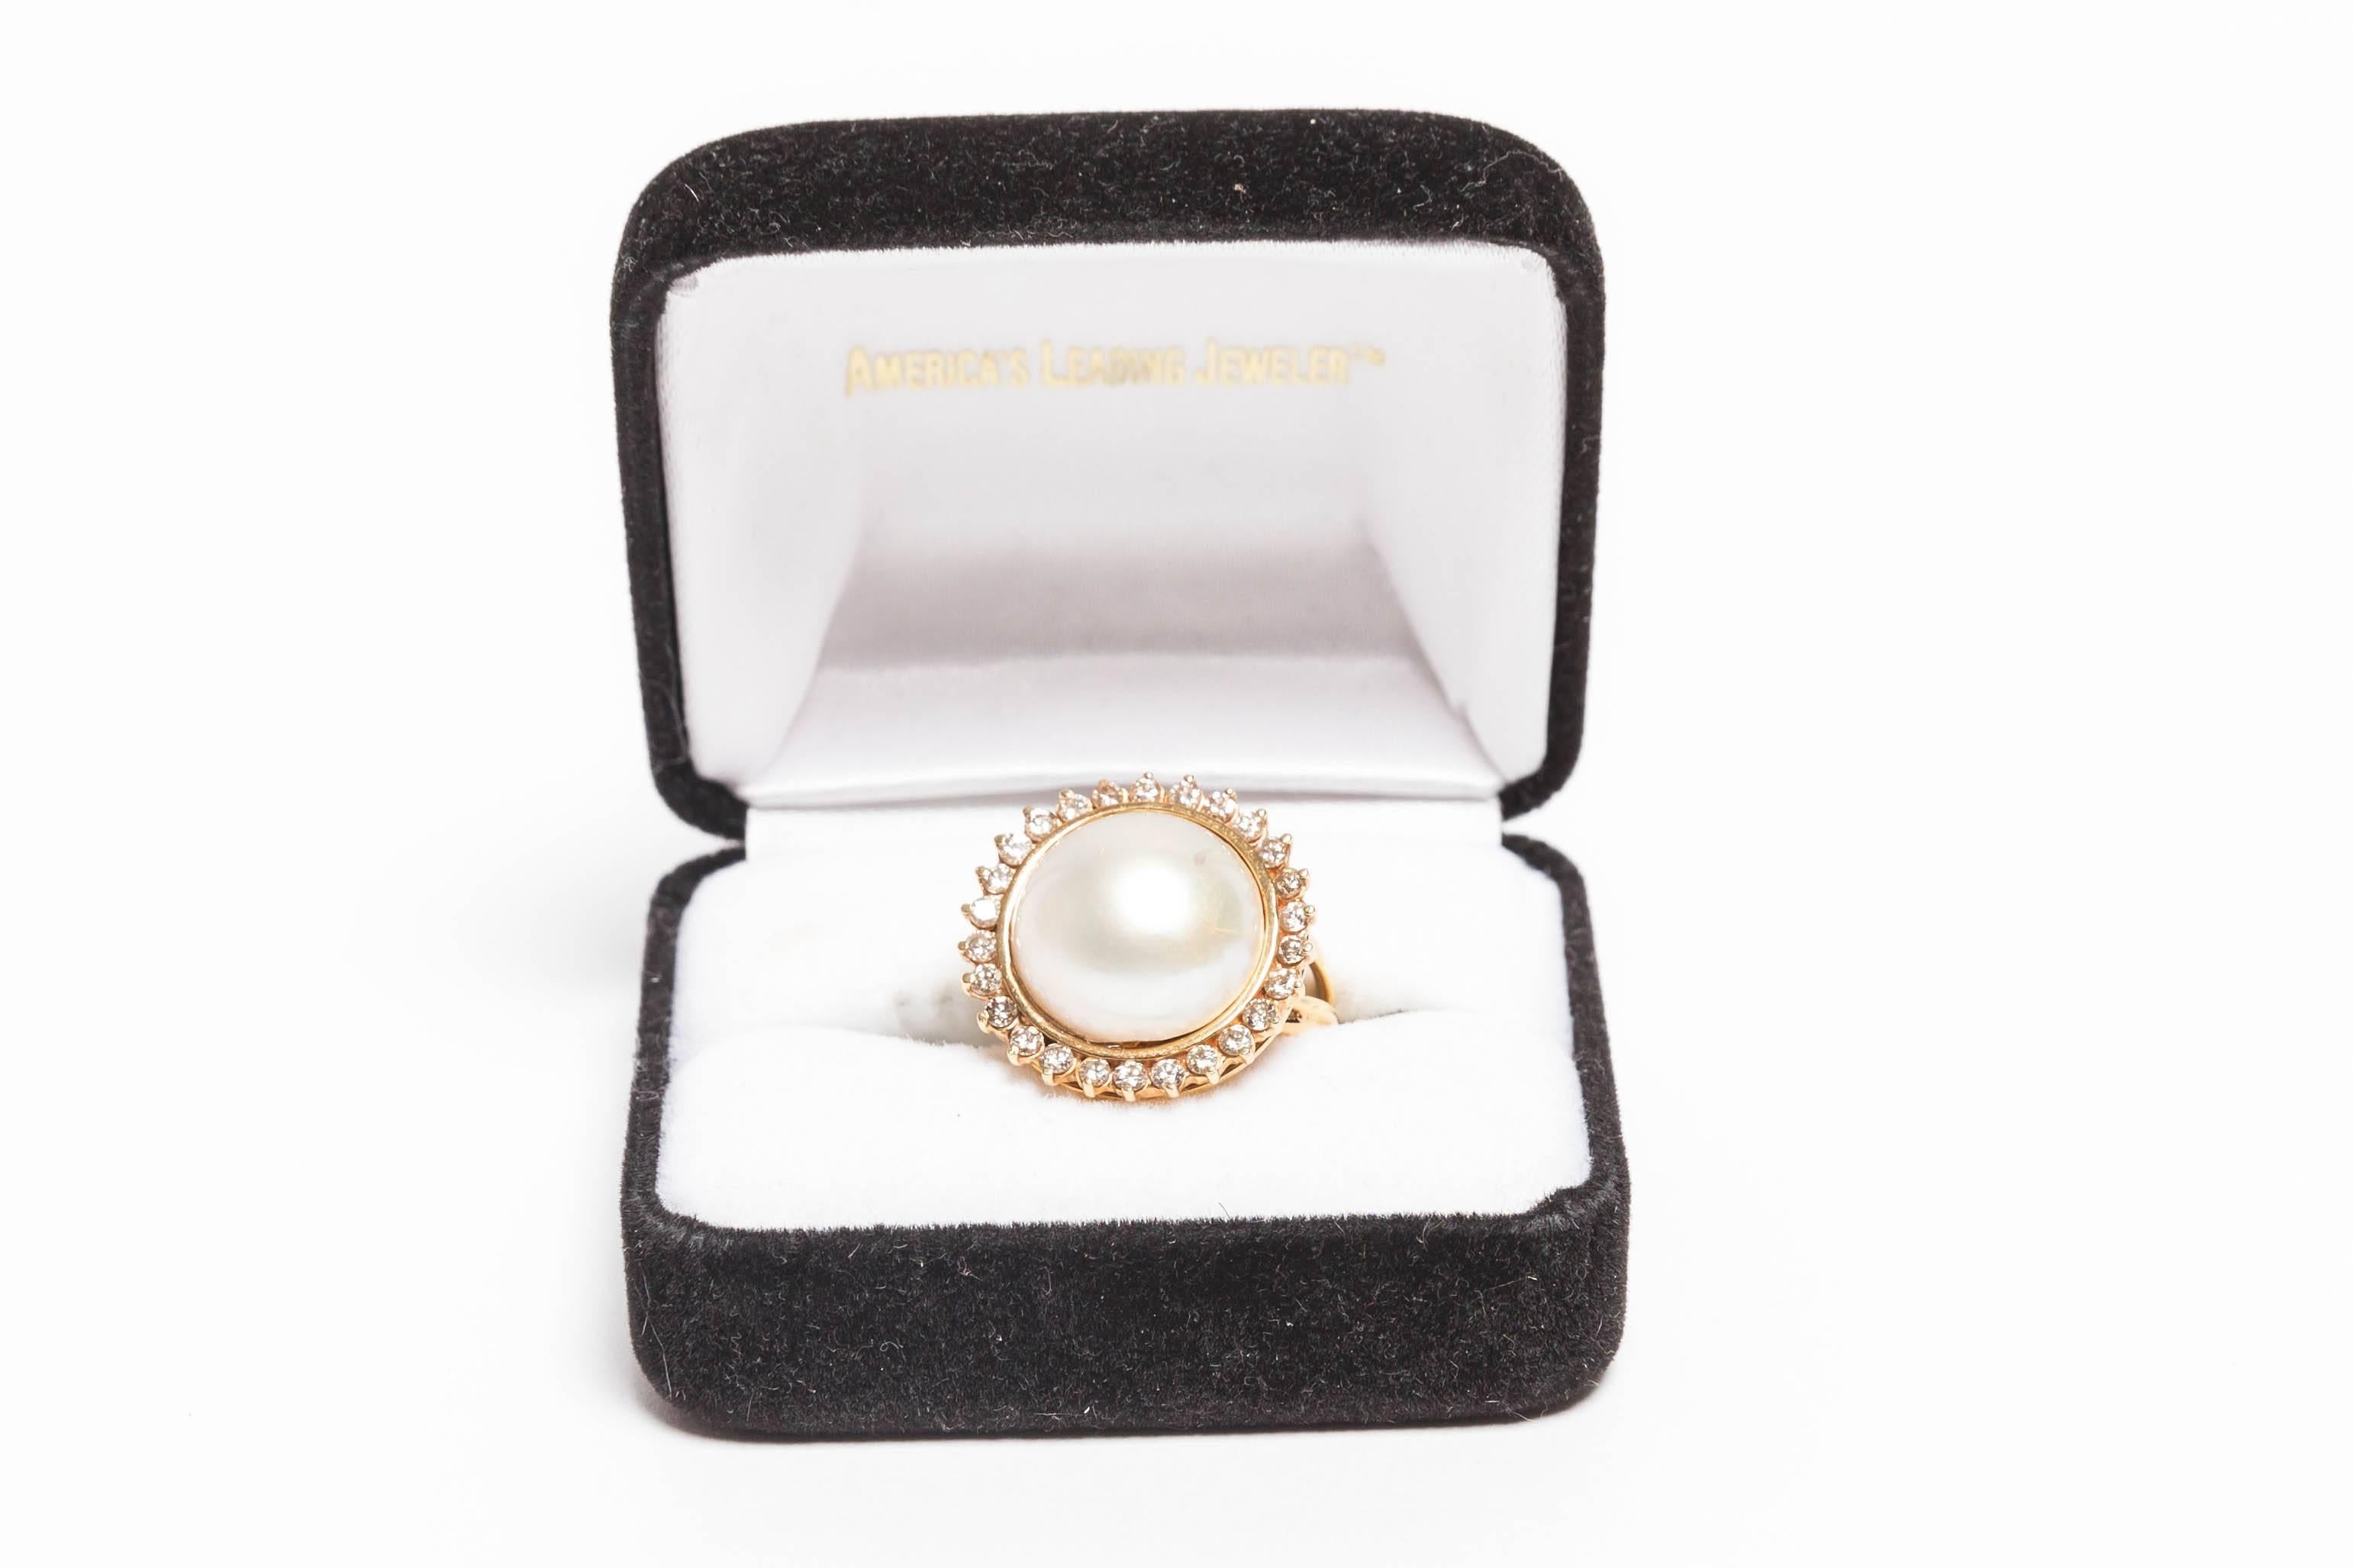 Very pretty Mabe Pearl and Diamond Cocktail Ring in 18 Kt Gold
26 round diamonds surround a gold bezel set mabe pearl
The pearl measures approximately 5/8ths of an inch
Ring size is a 9